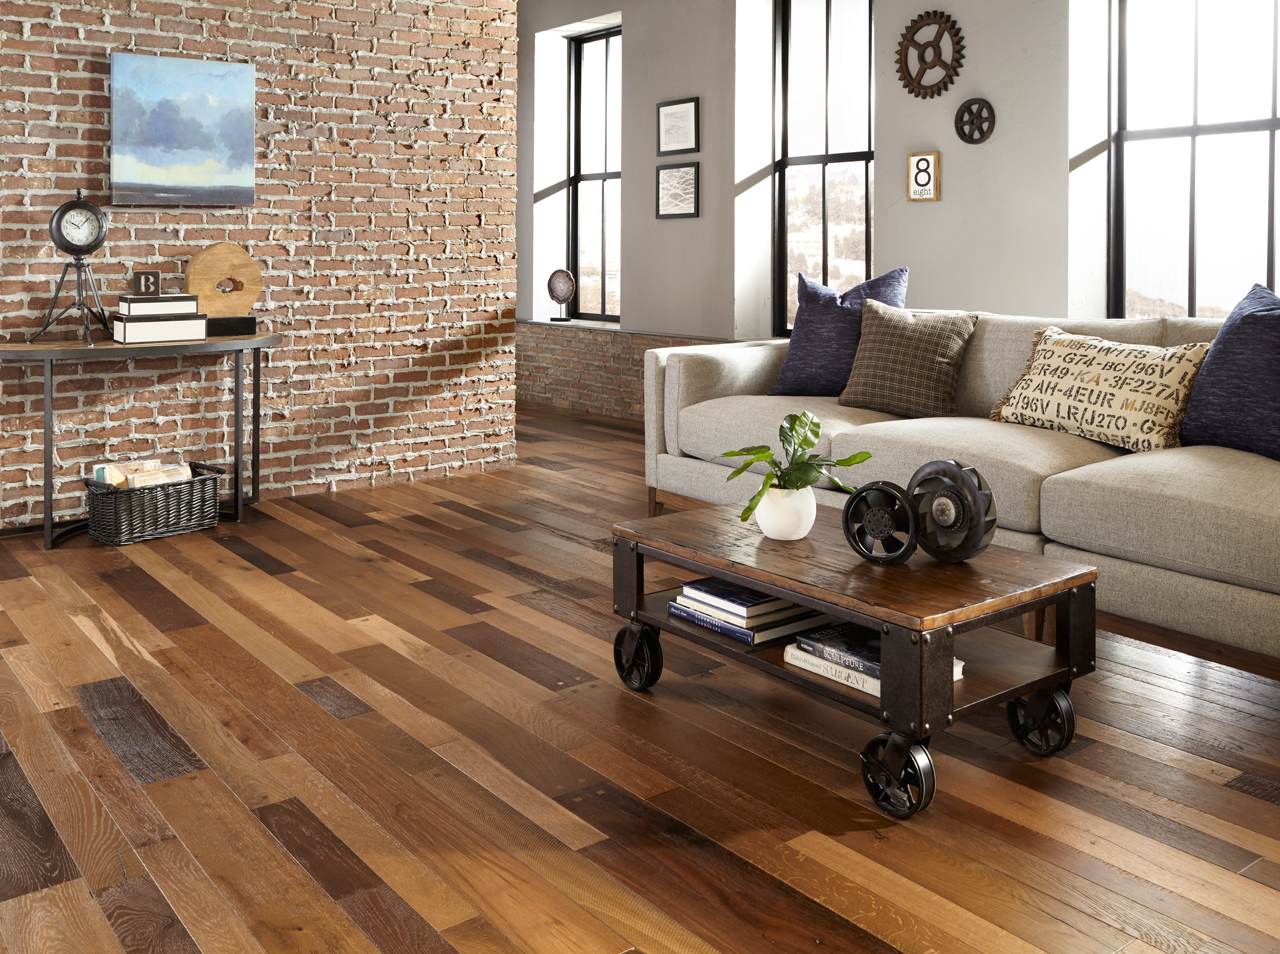 Top 7 Design Trends For Your Home This, High Variation Laminate Flooring